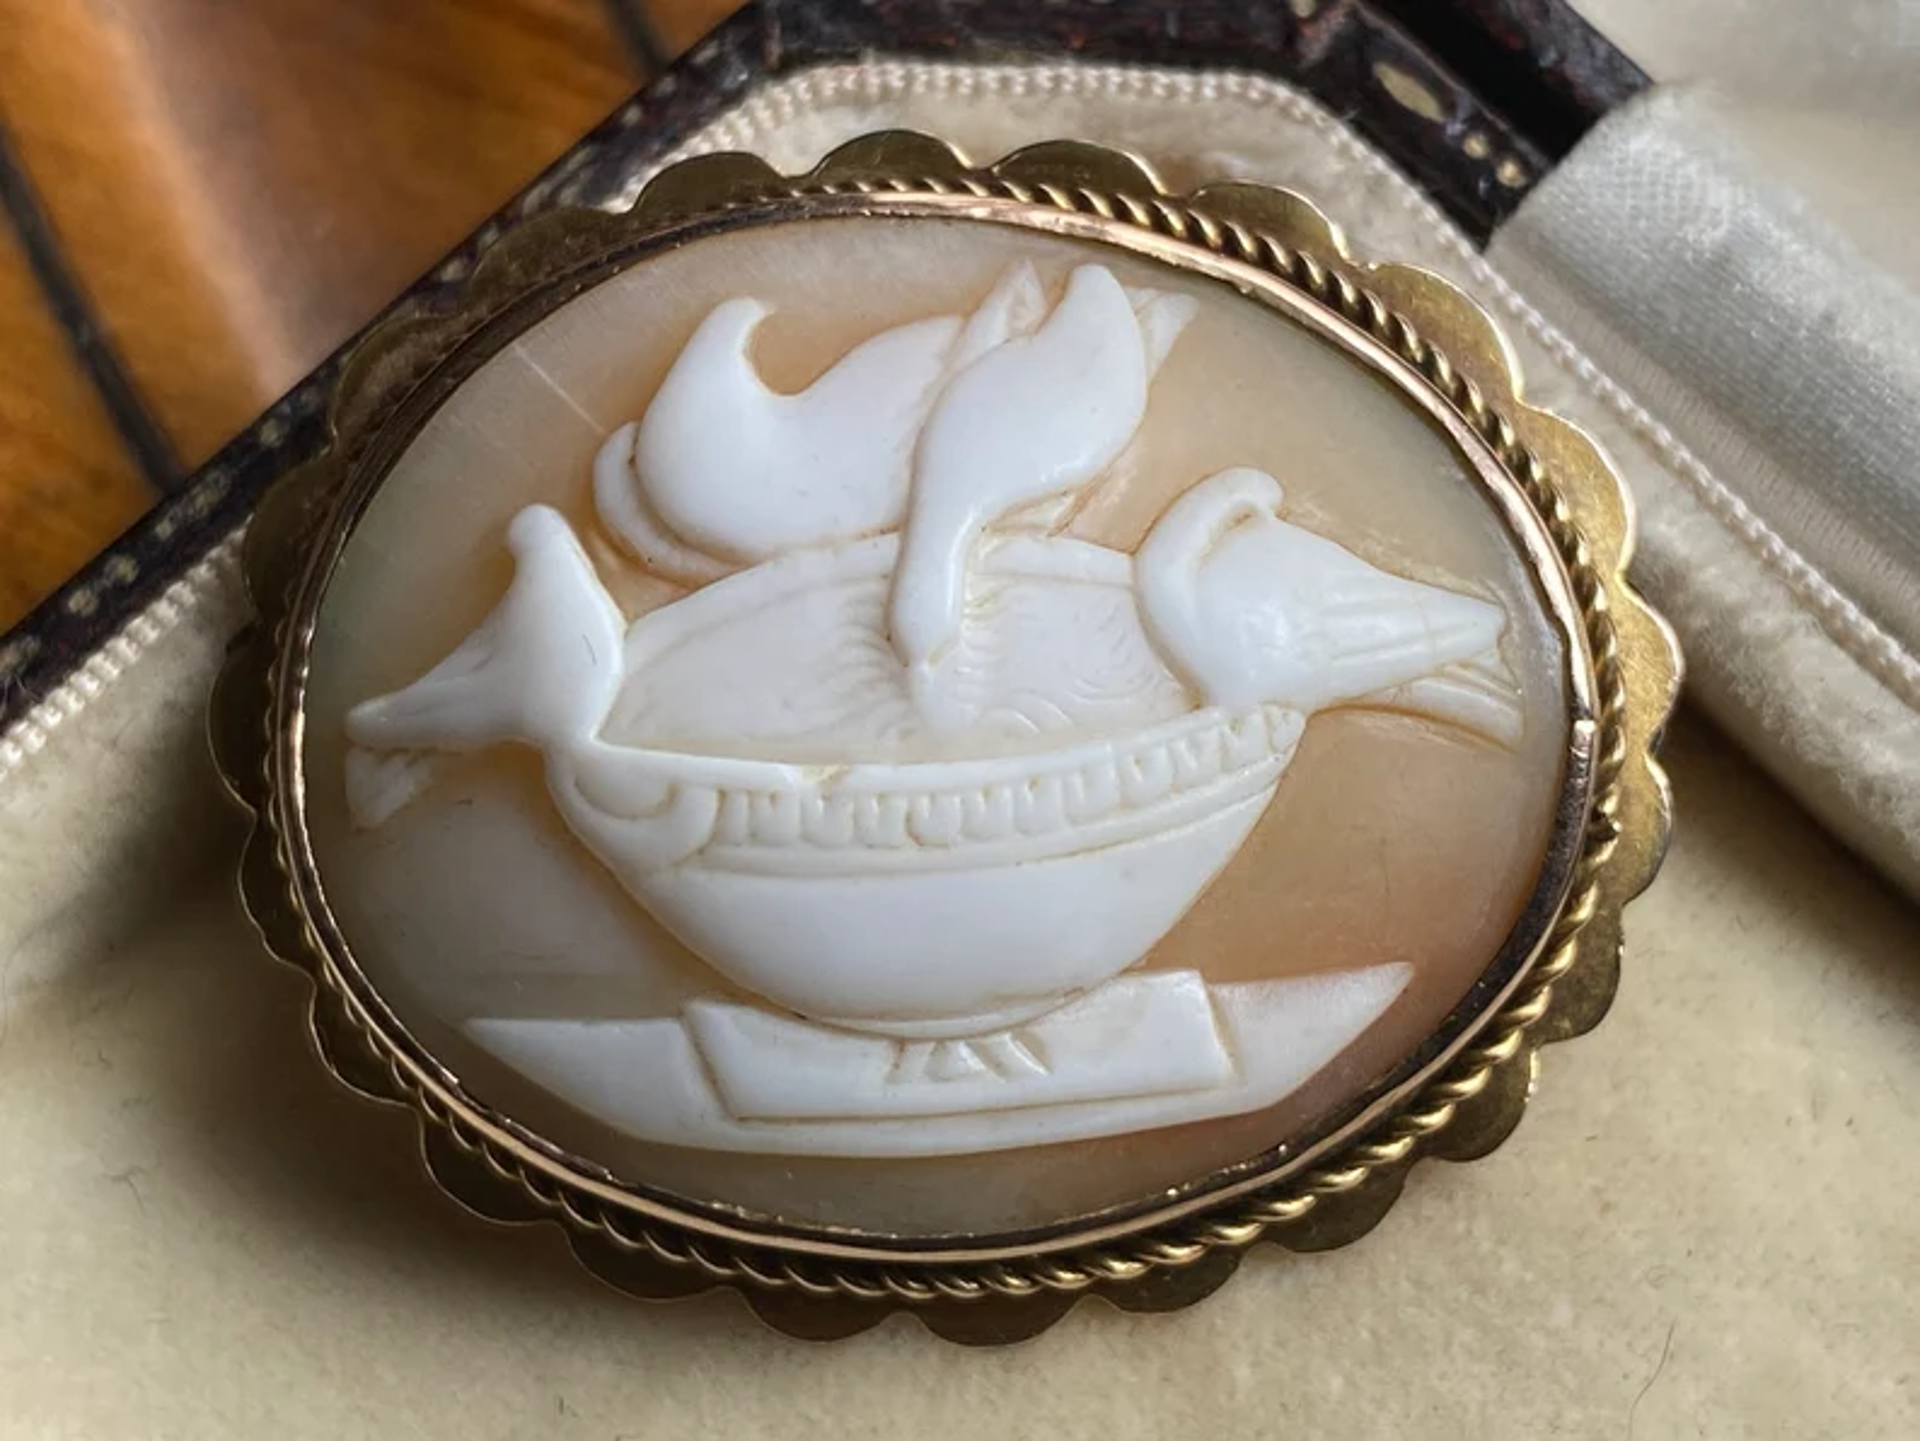 Victorian grand tour Doves of Pliny Italian carved shell cameo brooch/pin, 9ct gold by Cameo